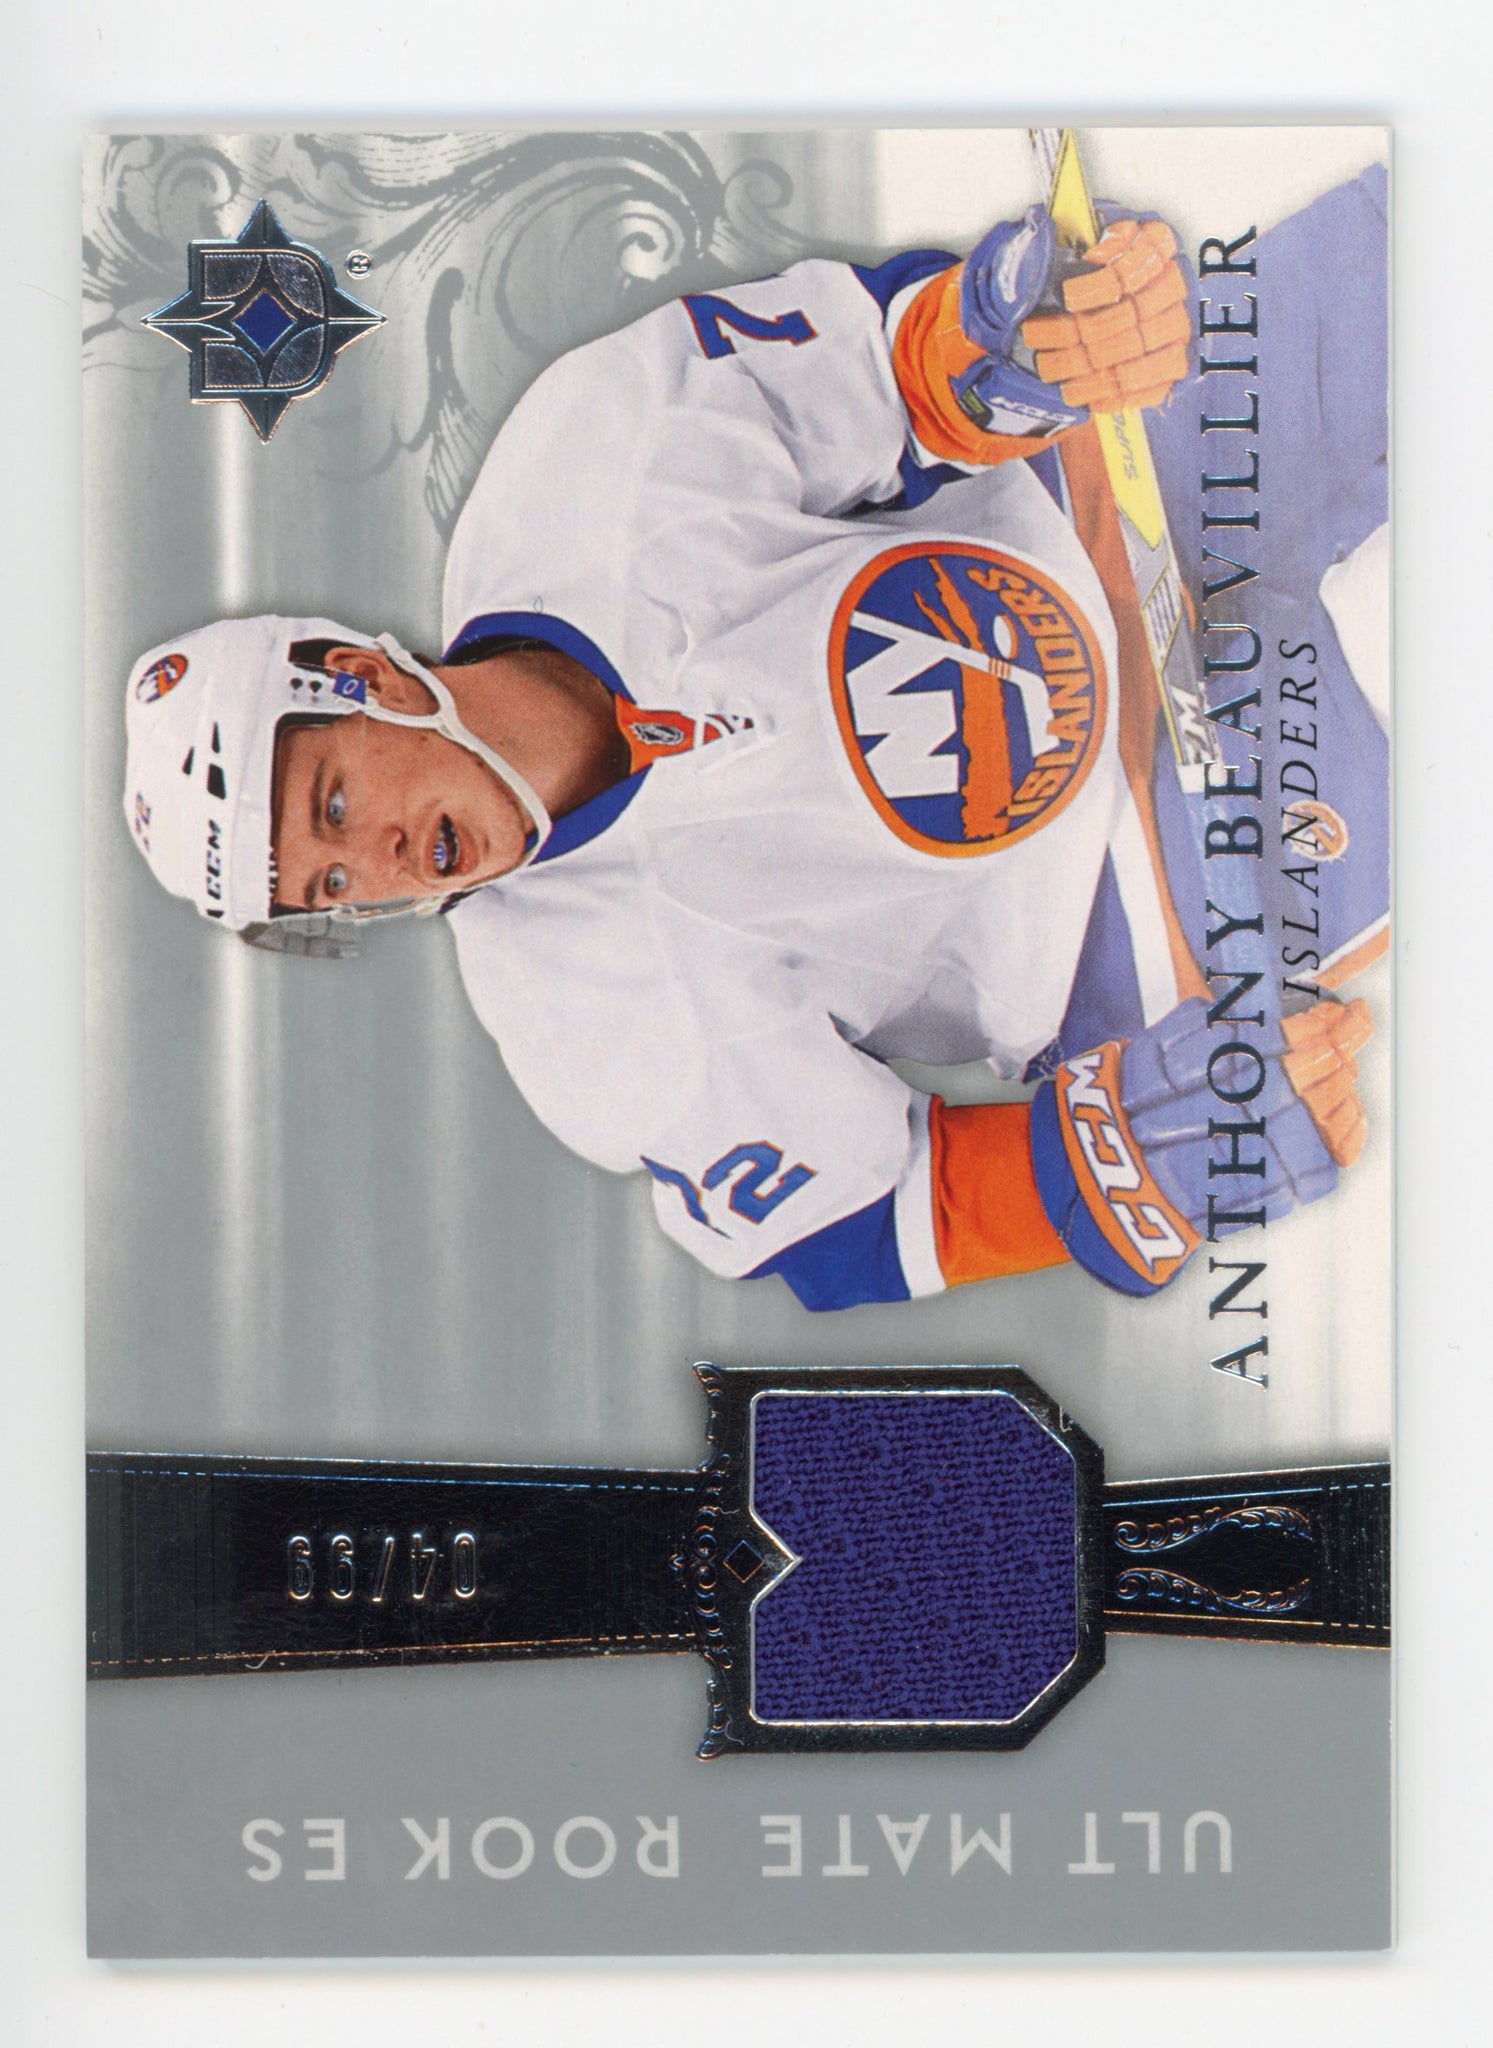 Anthony Beauvillier Ultimate Rookies 2016-2017 #d / 99 Patch New York Islanders # RRJ-AB